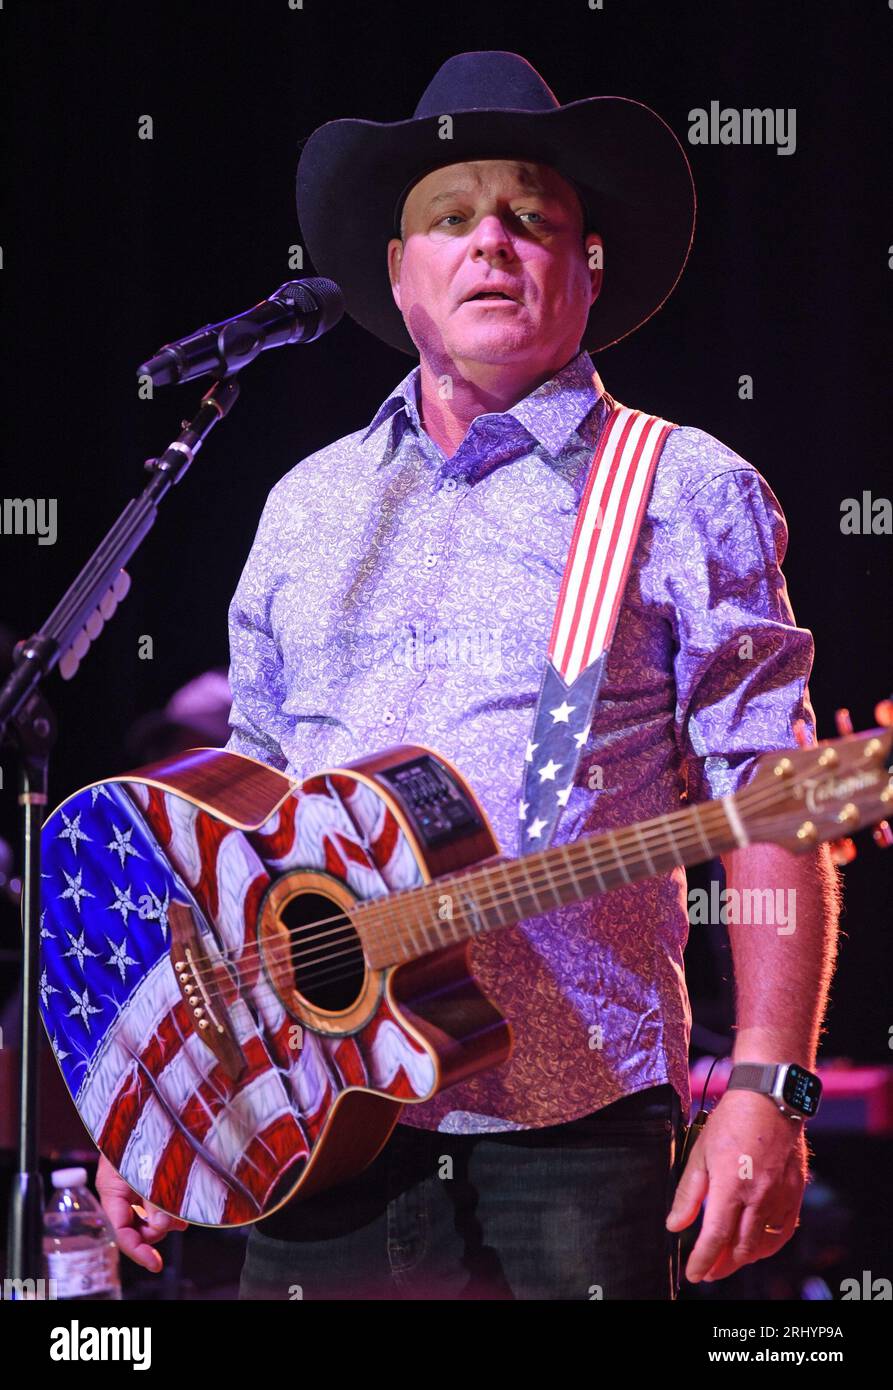 Hiawassee, GA, USA. 19th Aug, 2023. John Michael Montgomery on stage for Brotherly Love Tour with John Michael Montgomery and Eddie Montgomery, Anderson Music Hall, Georgia Mountain Fairgrounds, Hiawassee, GA August 19, 2023. Credit: Derek Storm/Everett Collection/Alamy Live News Stock Photo